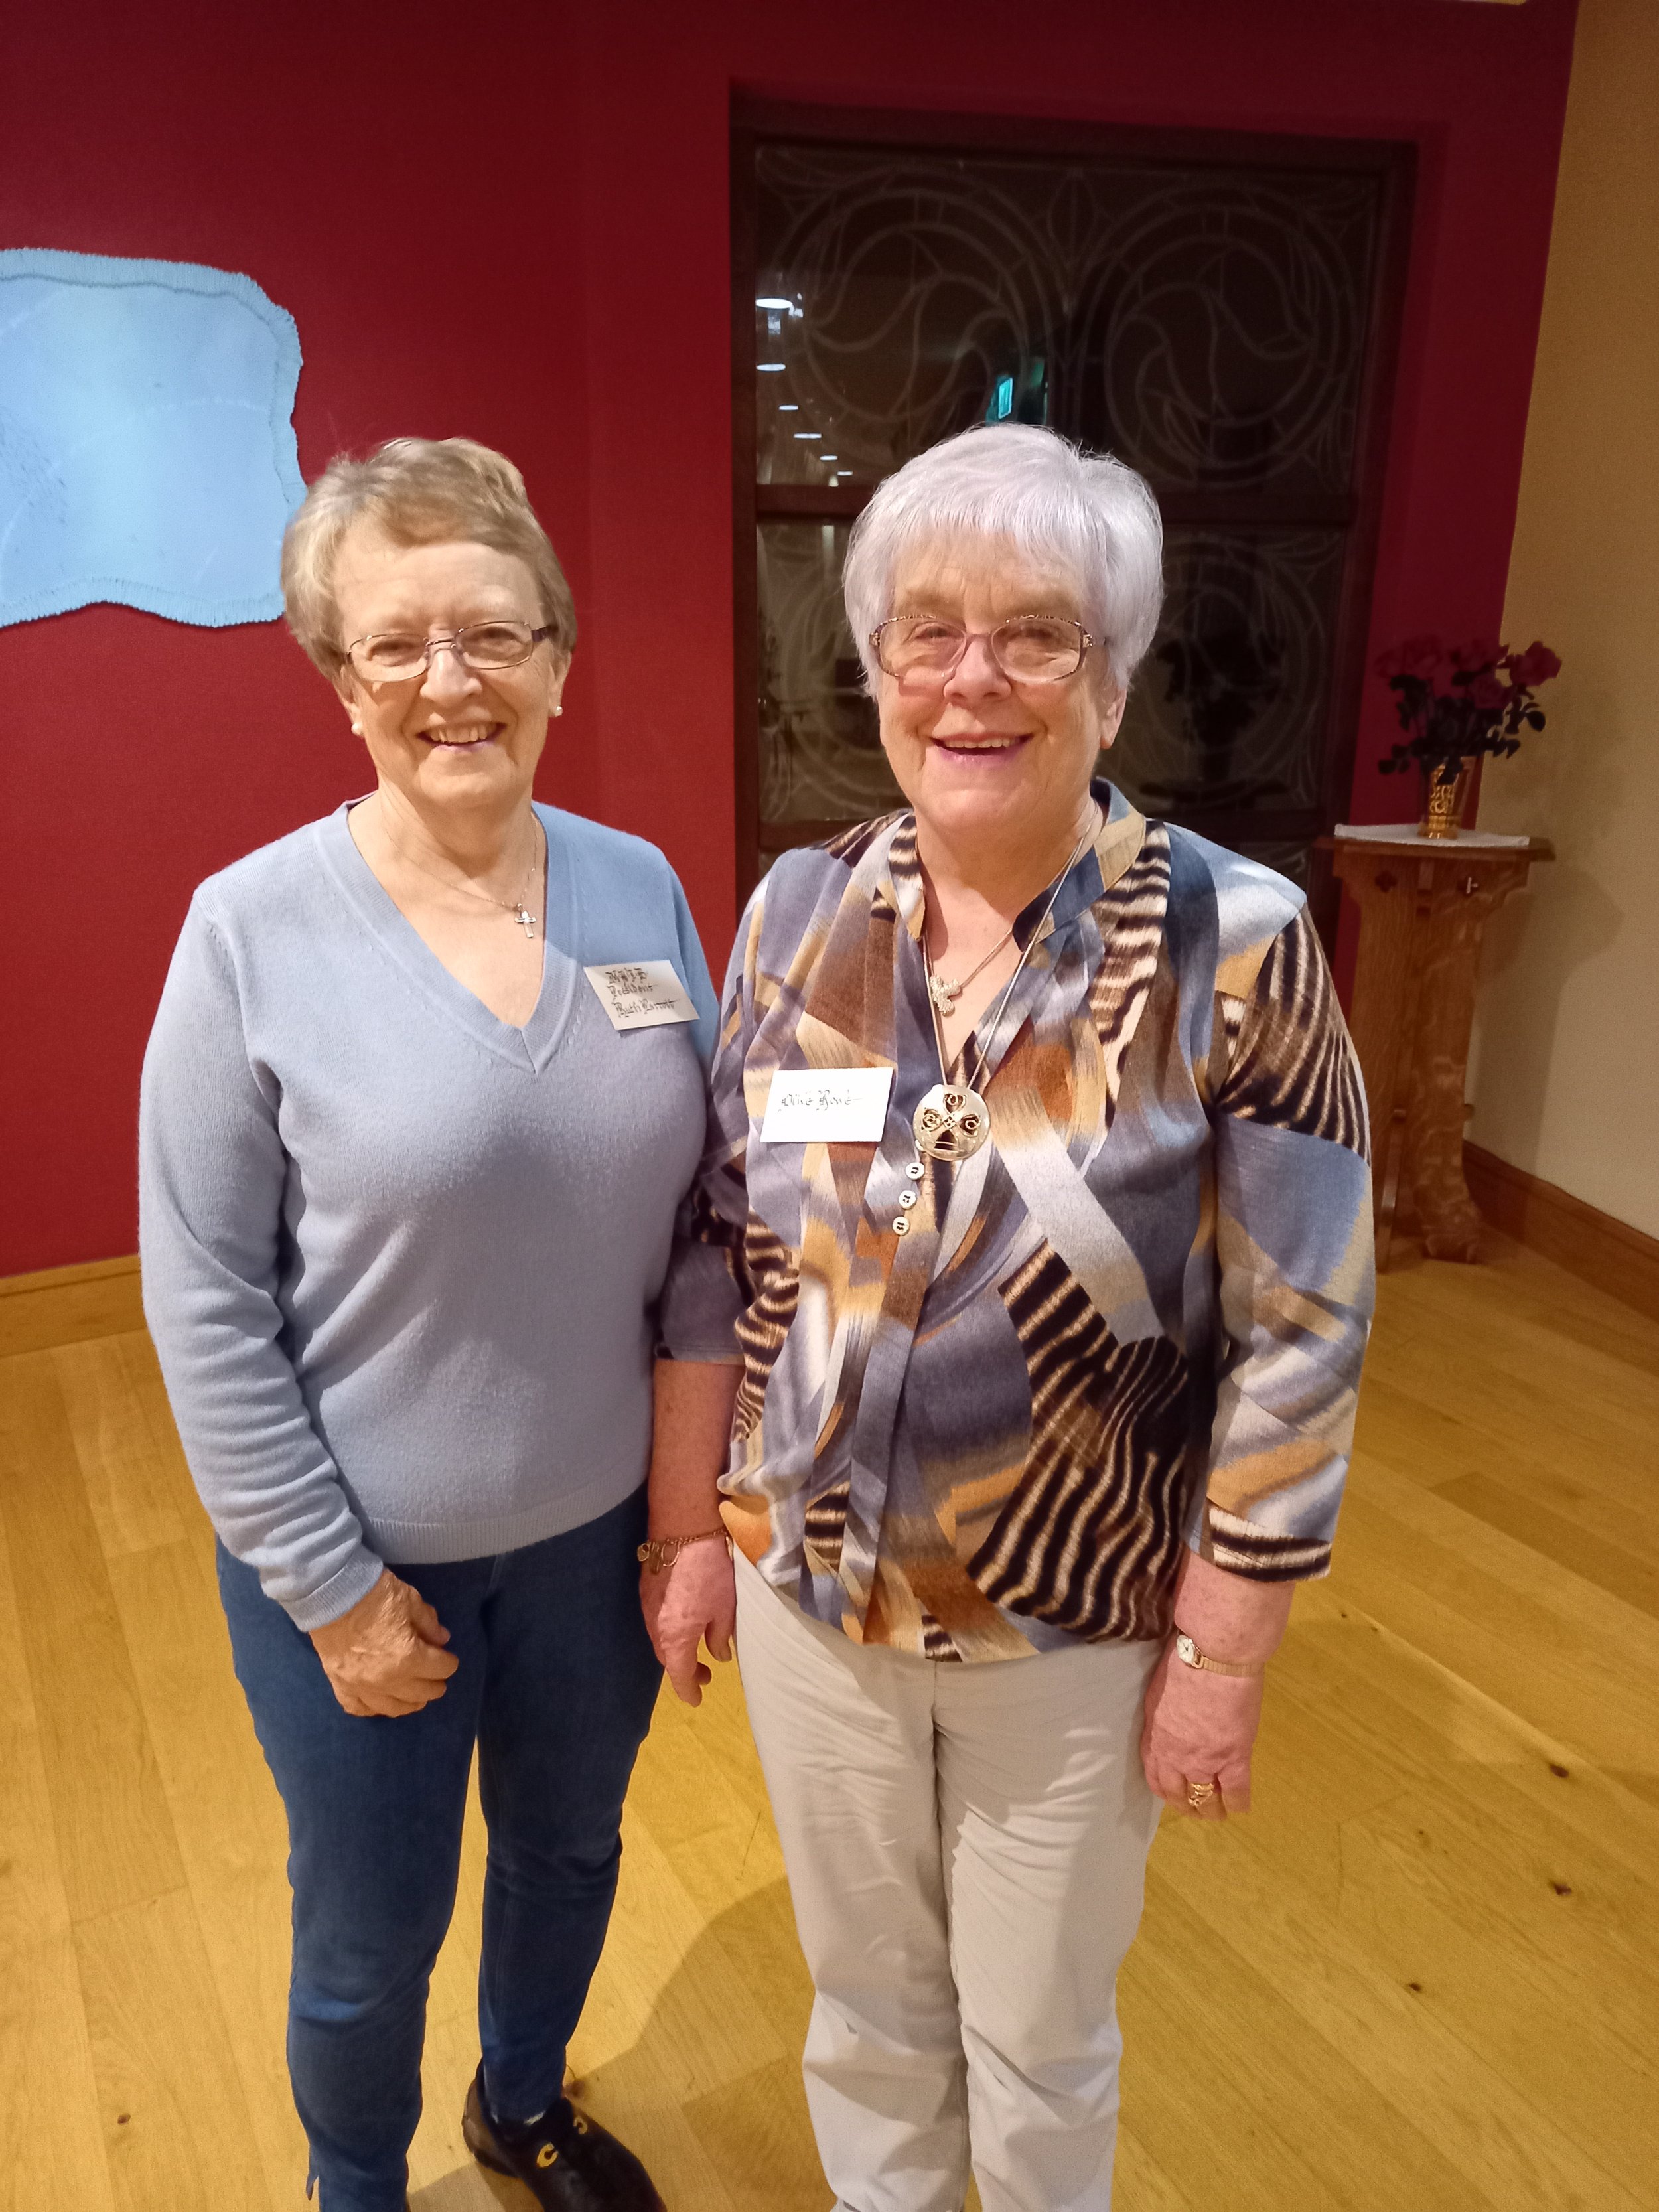 Olive Rowe All Ireland MWI President with Ruth Parrott Co-chair of Methodist Women in Britian